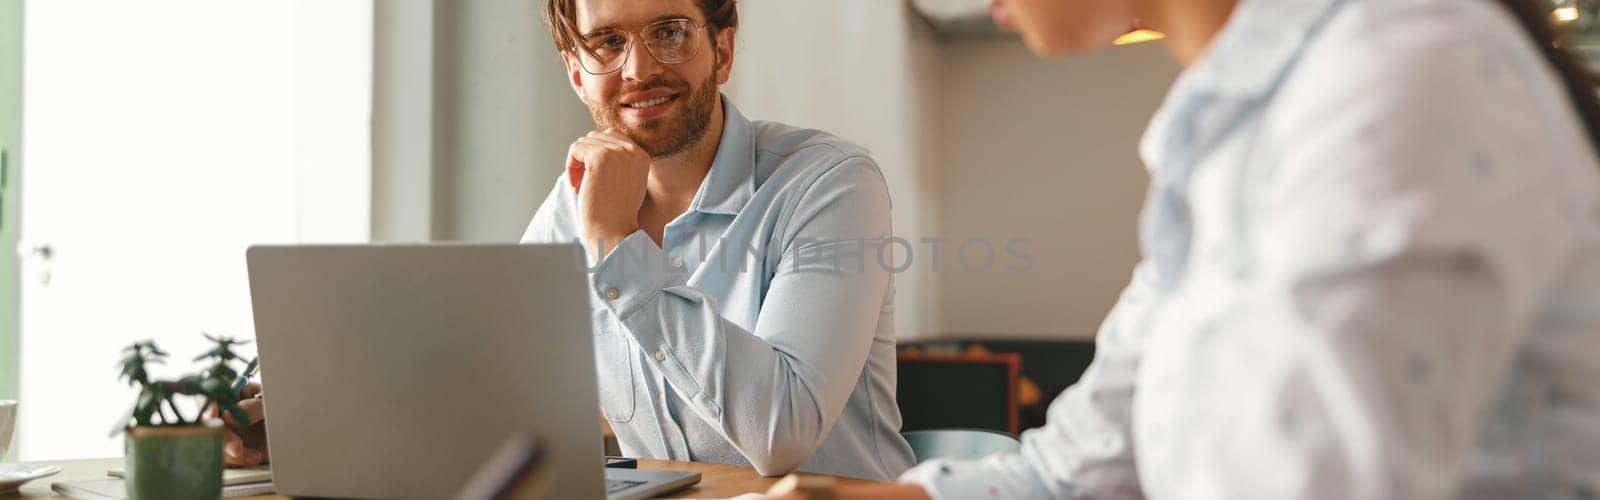 Two coworkers working together on project while using laptop in office meeting room